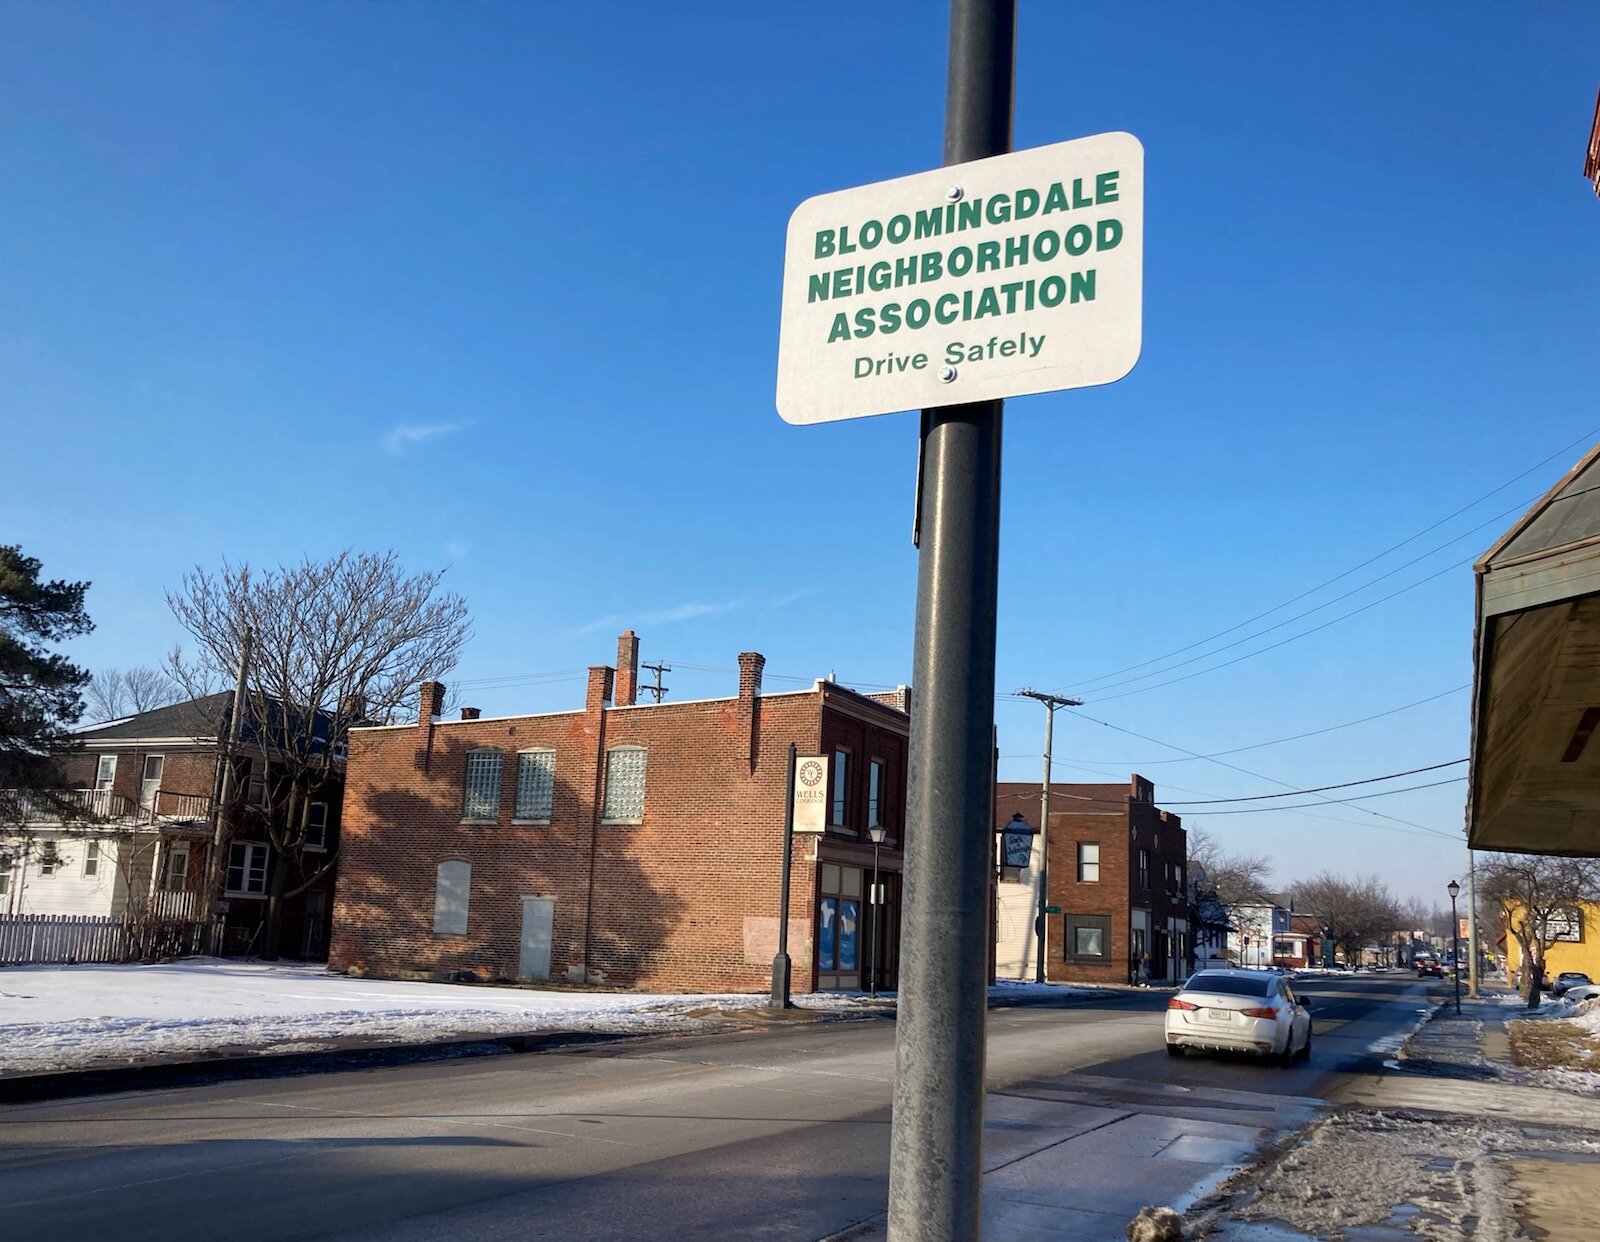 More residents are moving into the Bloomingdale neighborhood near Wells Street and traffic-calming measures are underway.